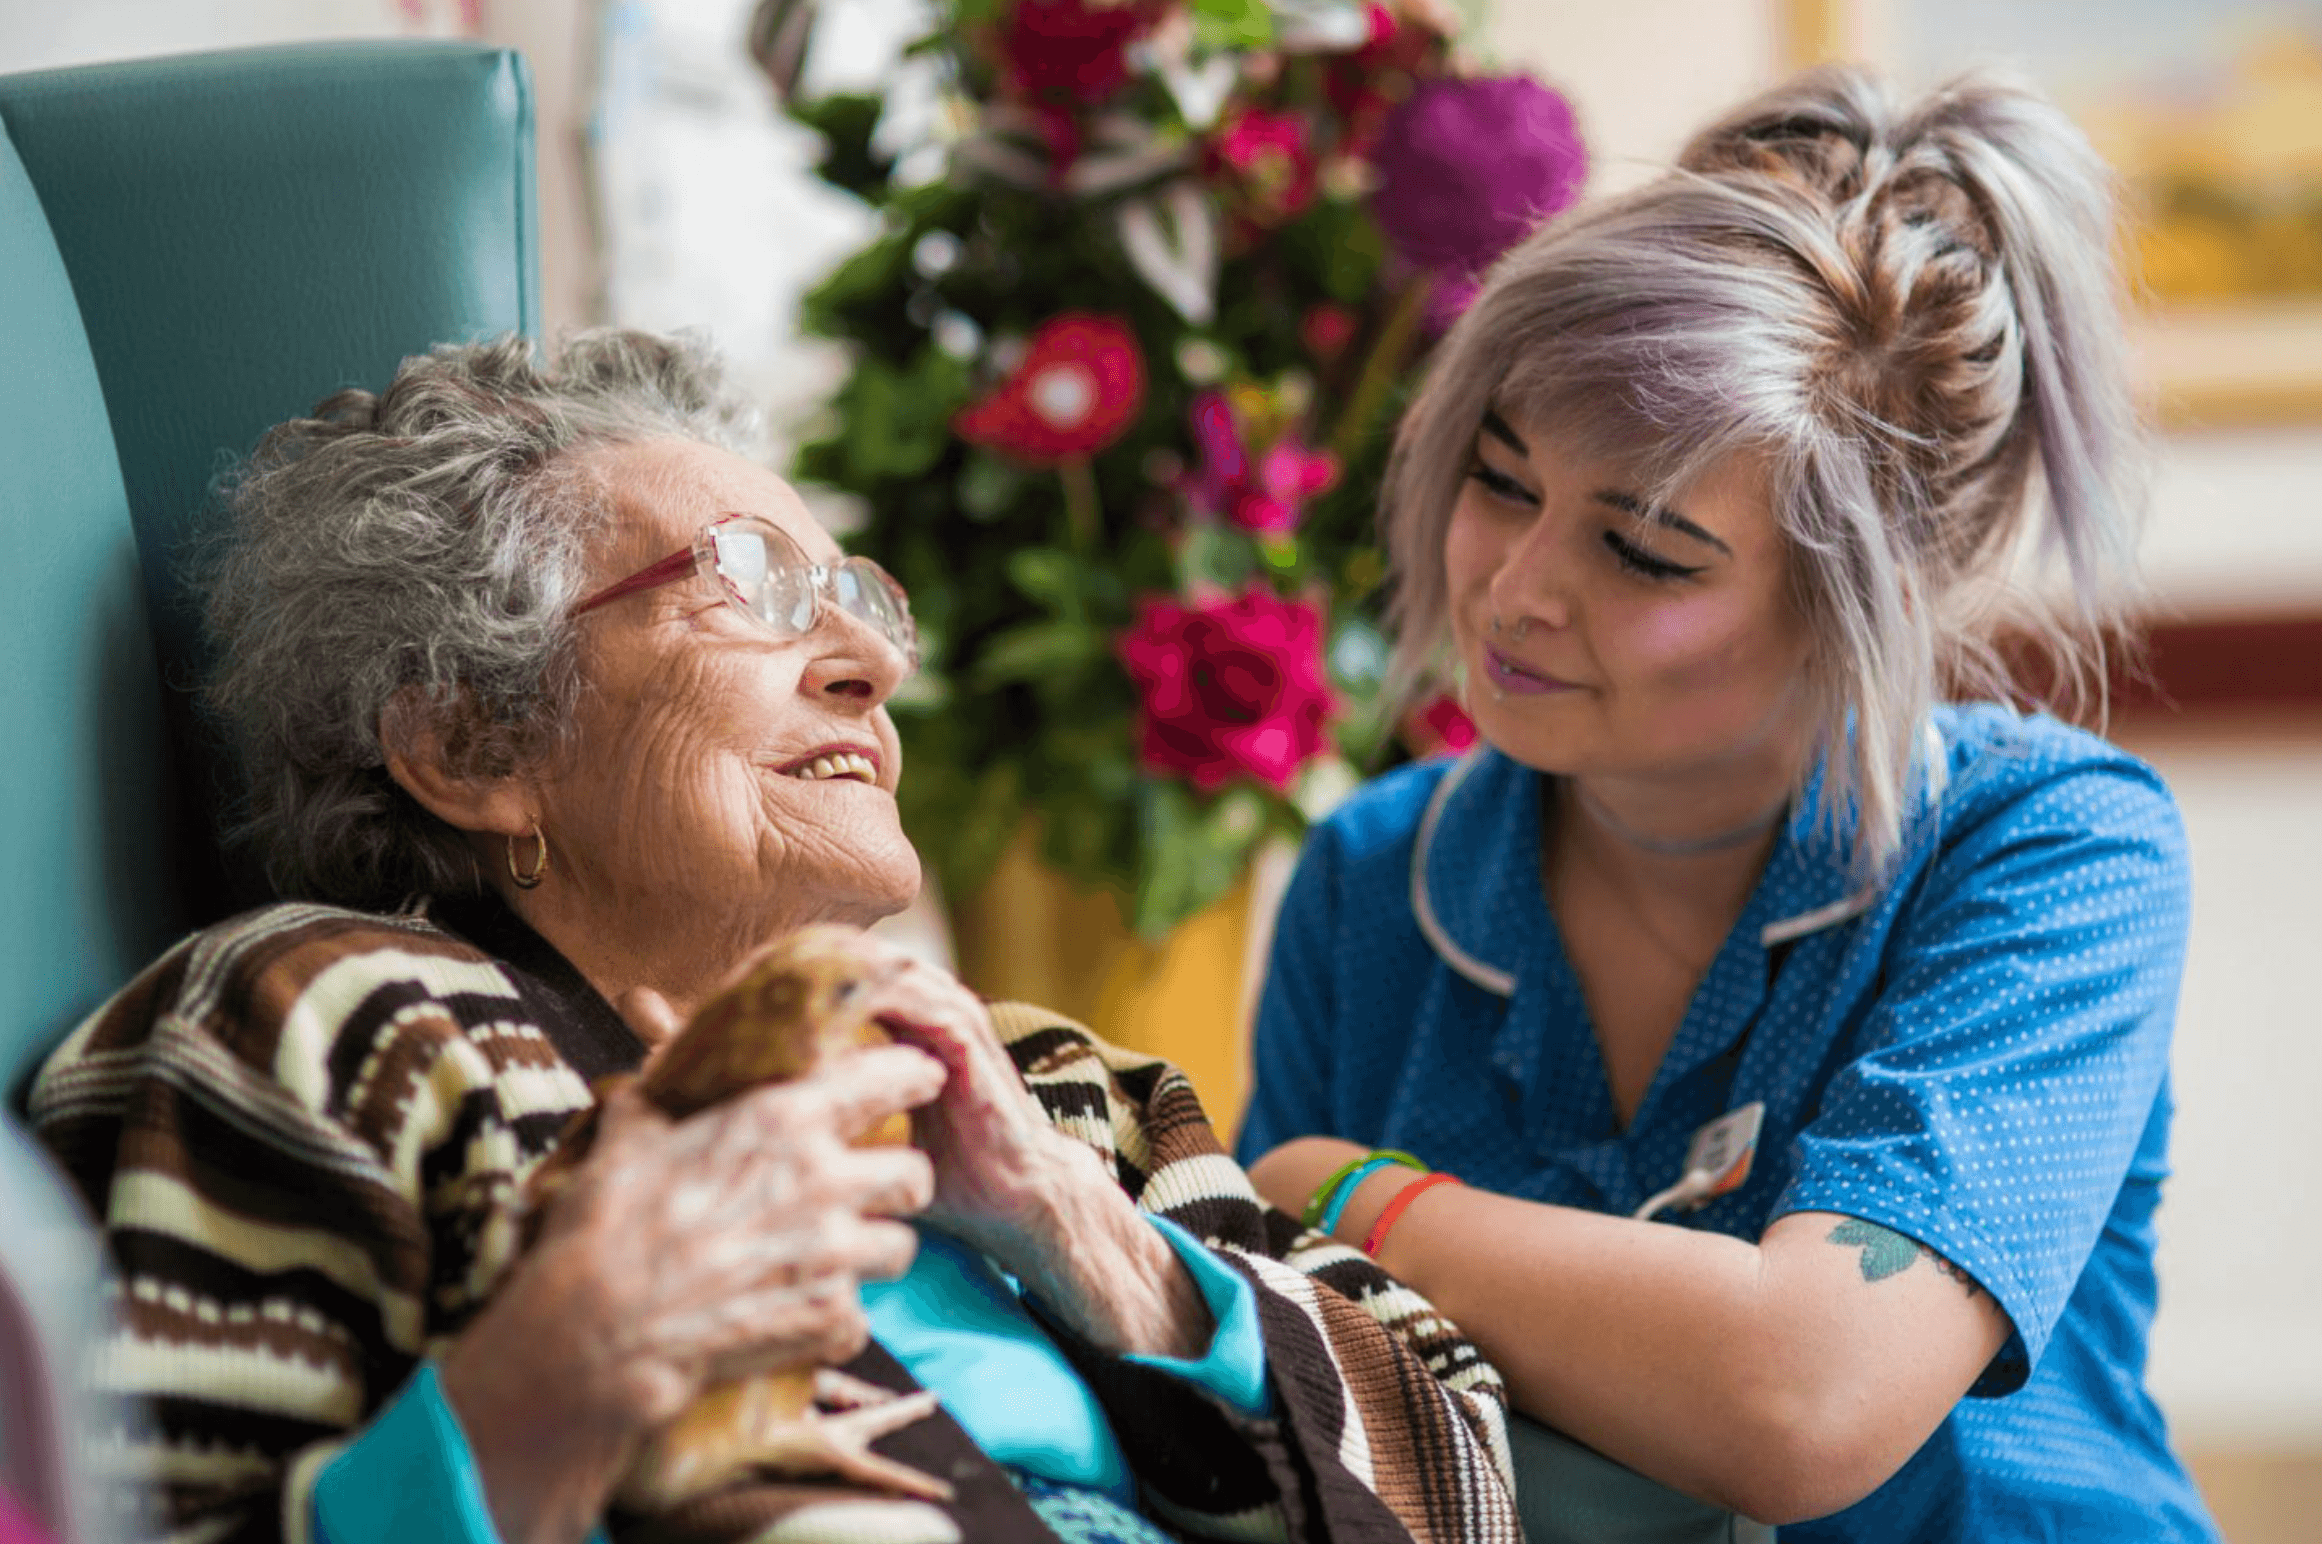 Staff and residents of Haydale Care Home in Glasgow, Scotland